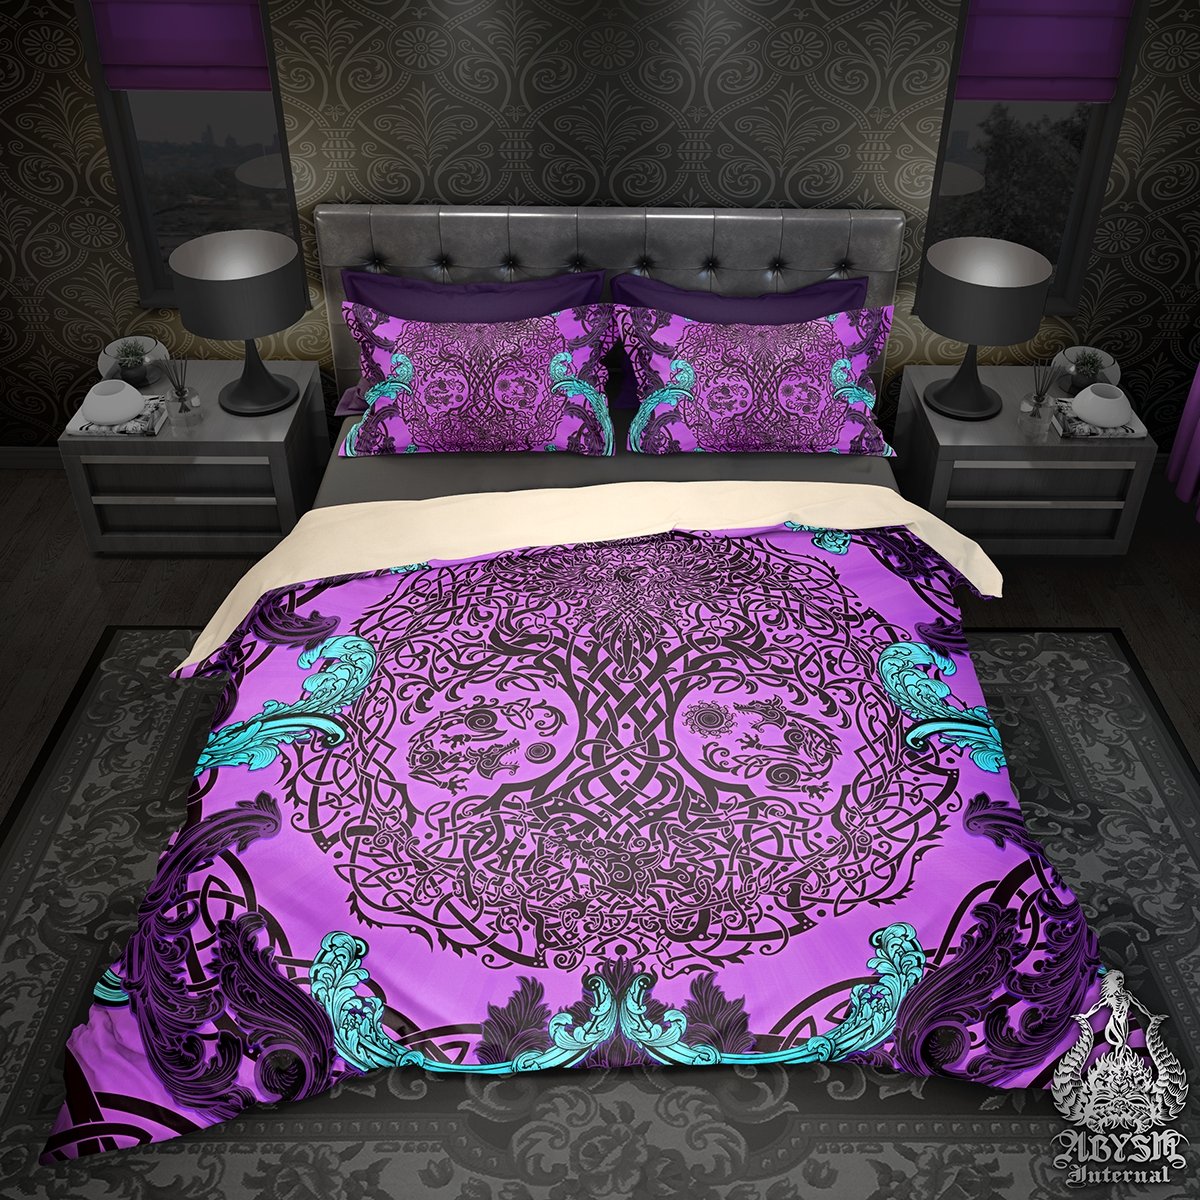 Viking Bedding Set, Comforter and Duvet, Yggdrasil, Norse Art, Pastel Goth Bed Cover and Bedroom Decor, King, Queen and Twin Size - Purple - Abysm Internal